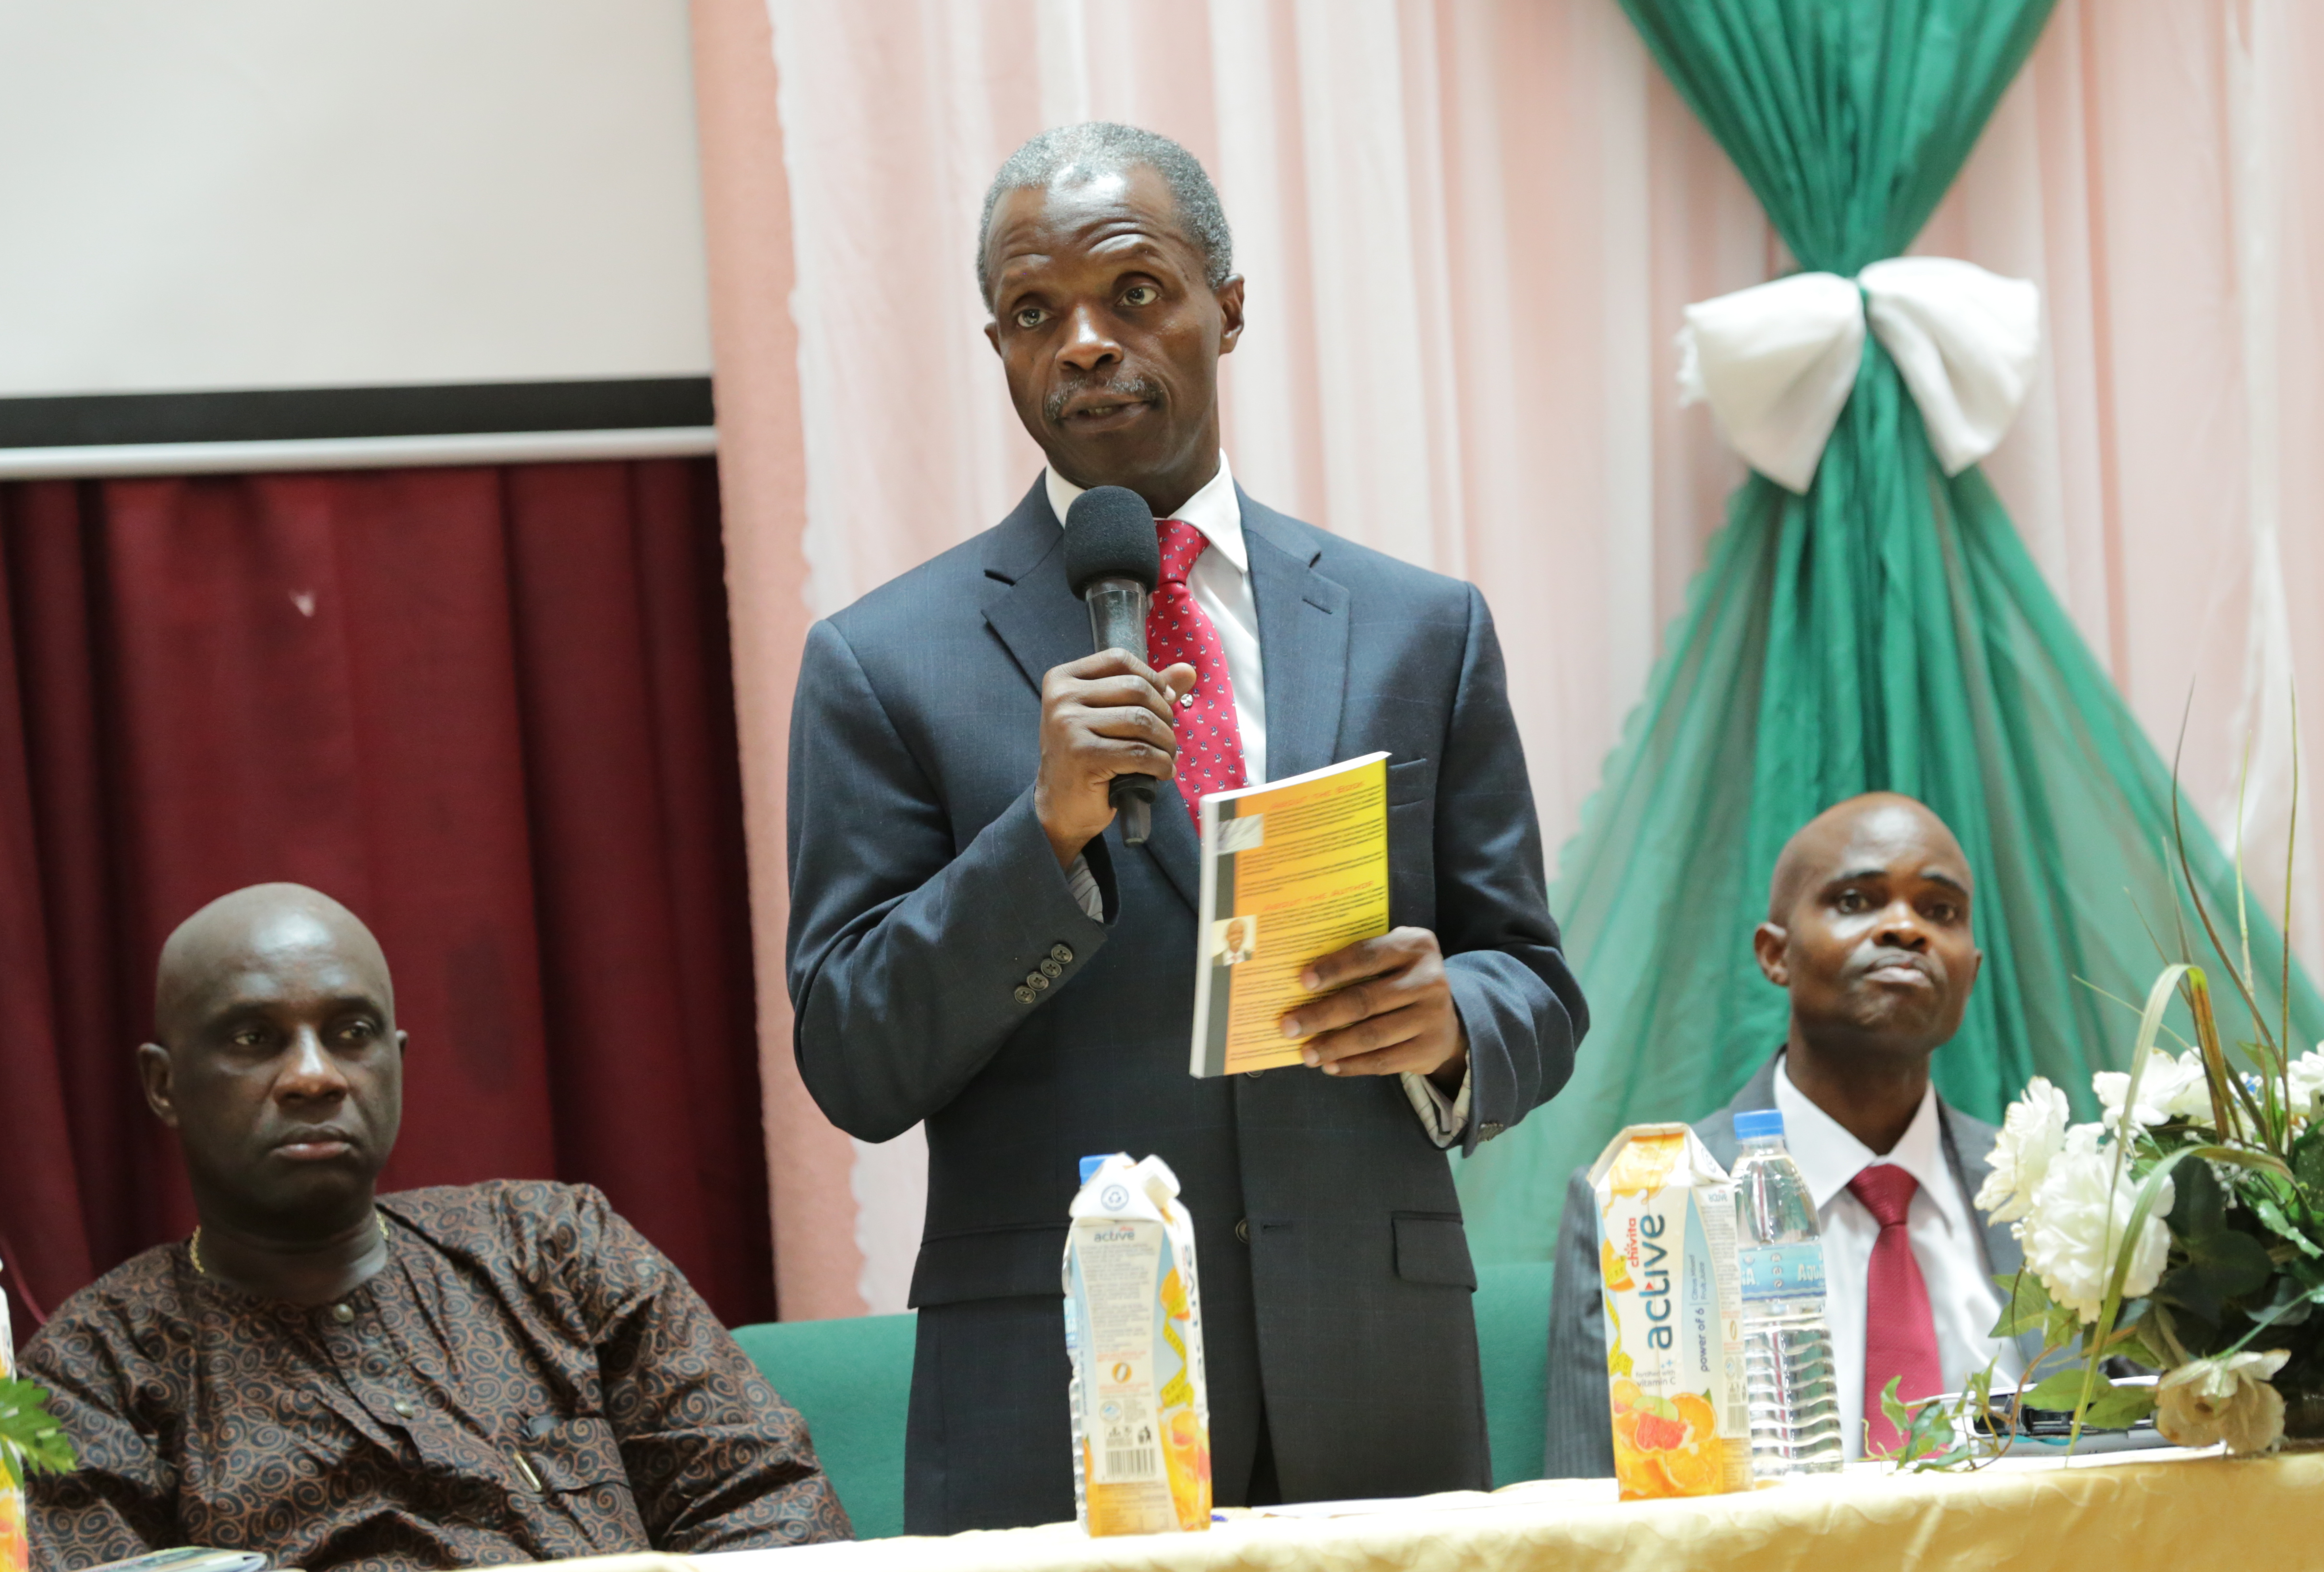 VP Osinbajo Attends Pastor Moses’ Book Launch On 18/05/2015